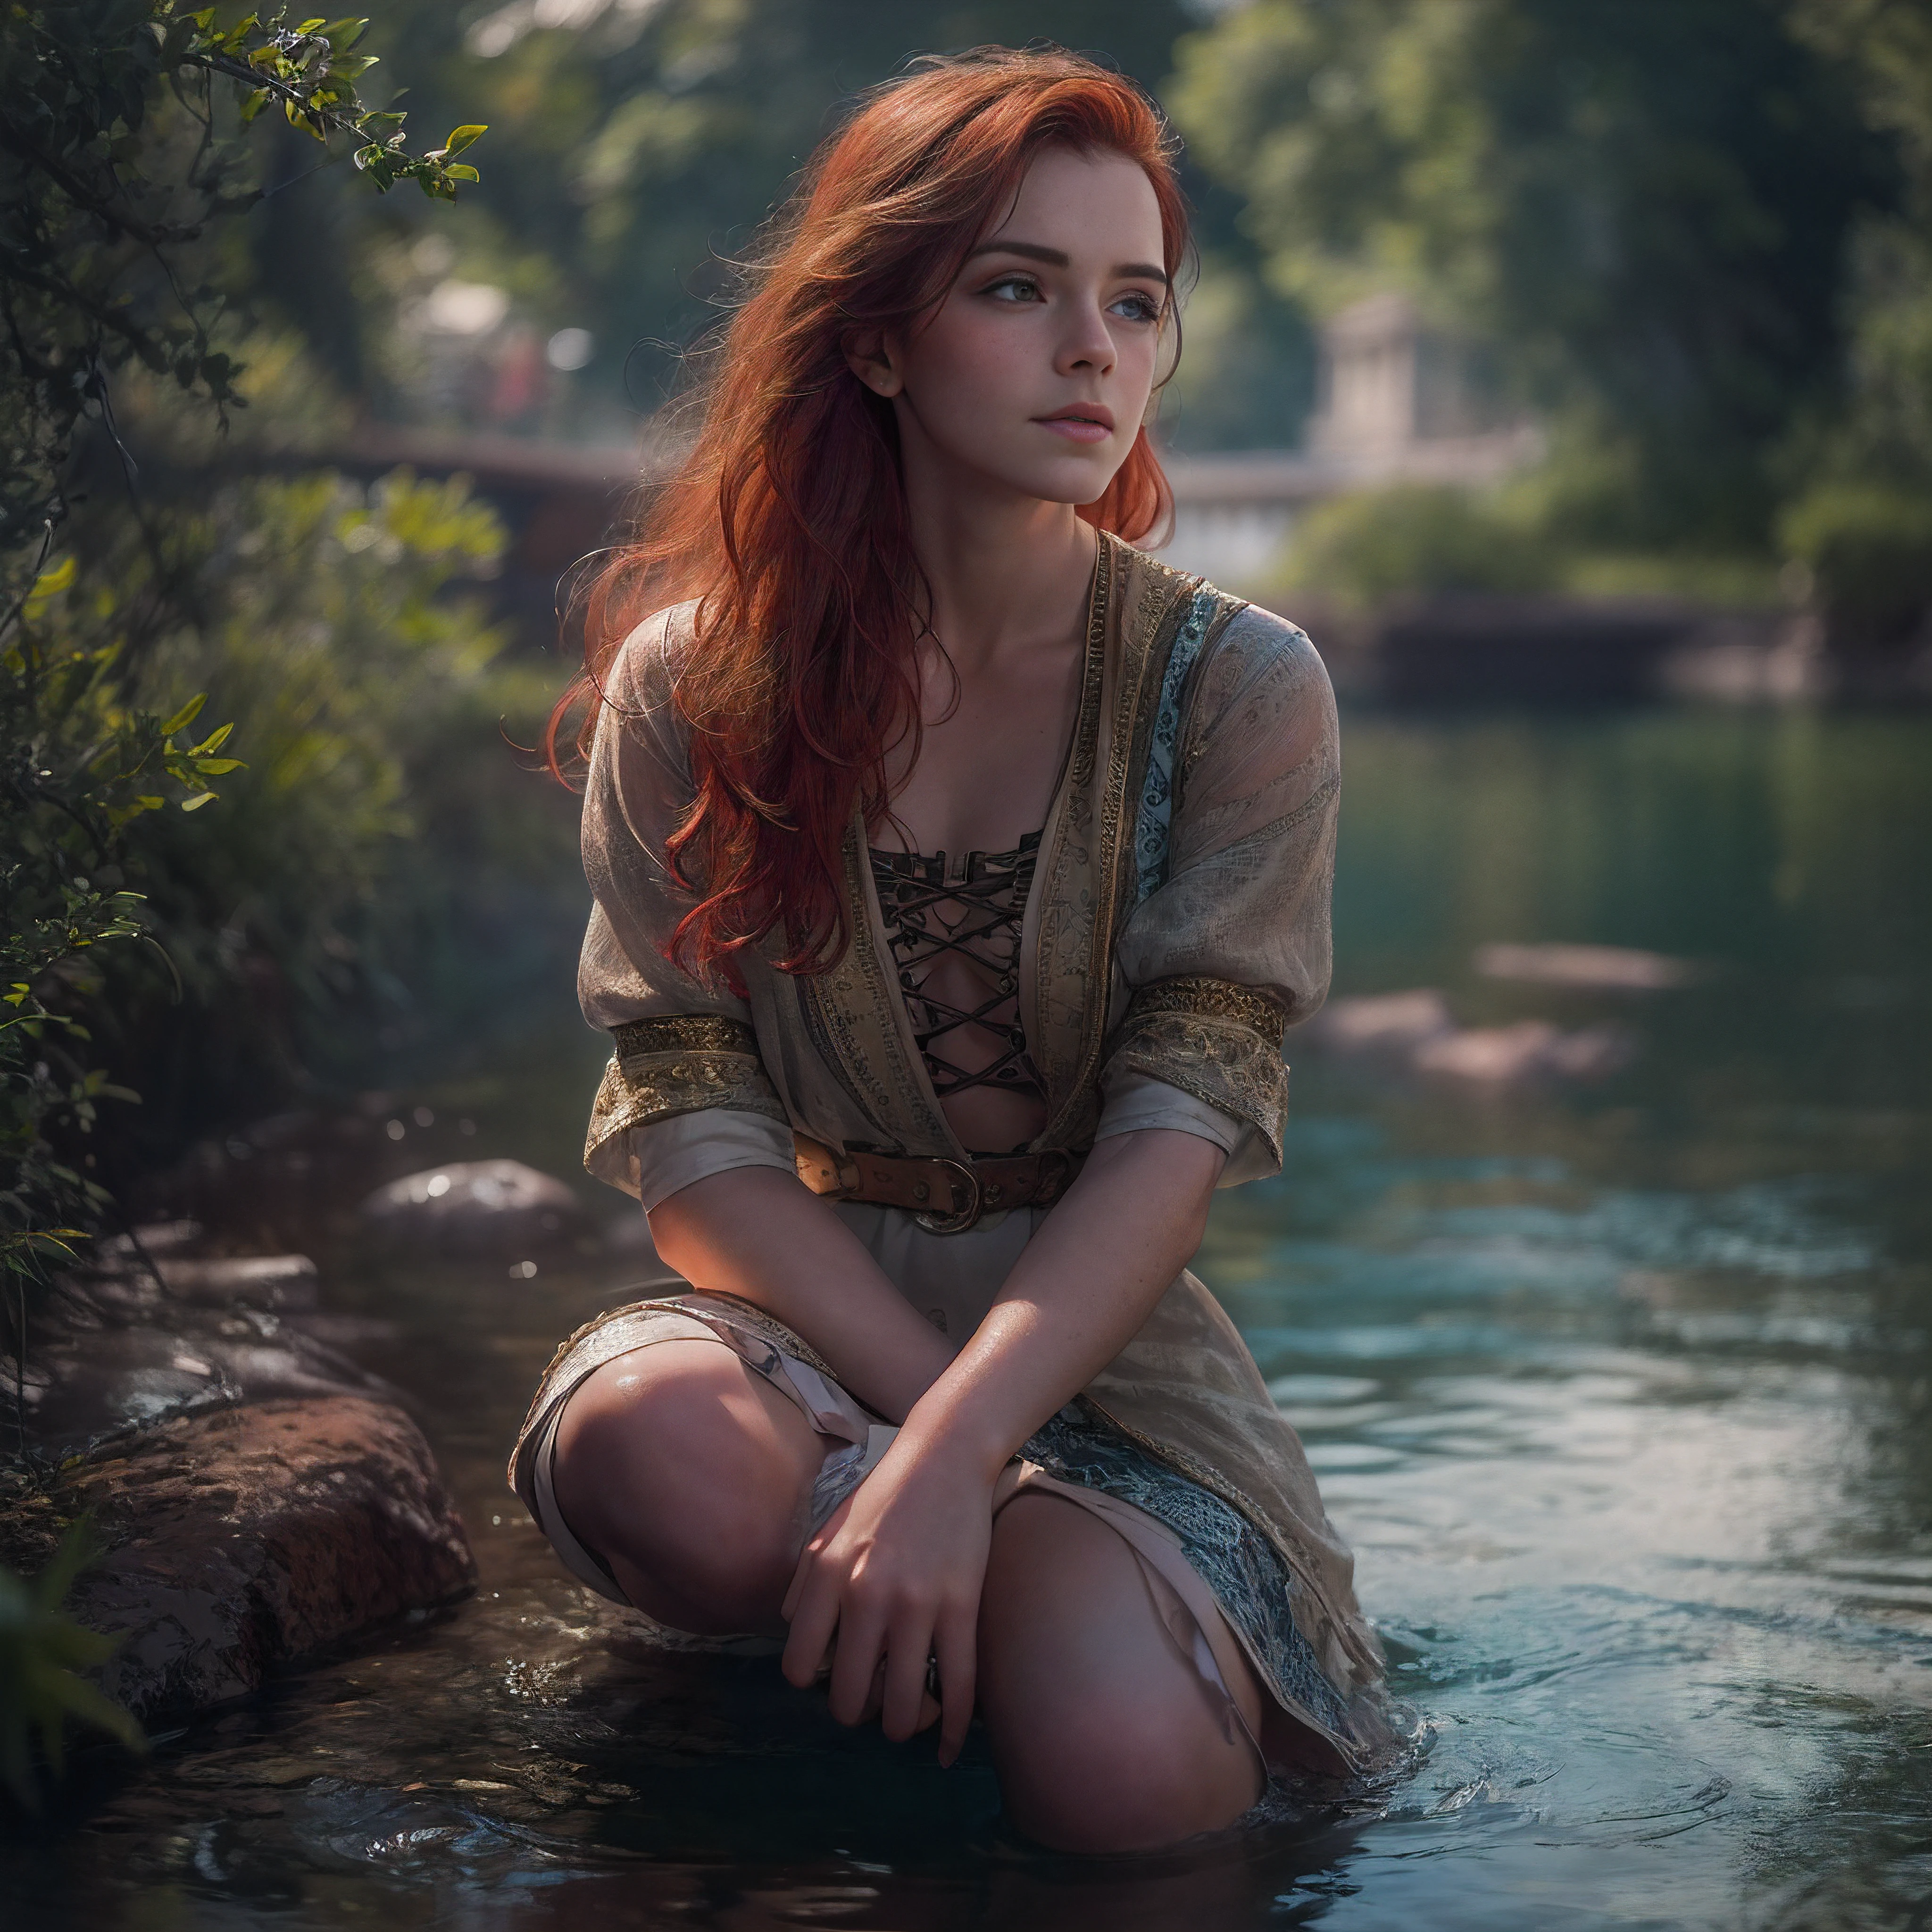 Masterpiece, (((full figure supermodel, full body shot, entire body in frame))), (((magical lighting action shot))) (((beautiful redhead fit pale smiling goddess Scottish woman kneeling in river garden in a park, arms covering flat chest, arms across , arms folded))), (((micro outfit, looking into the camera))) , ((( redhead hair, accurate hands accurate eyes))) moody lighting, very detailed, dramatic lighting, digital art trending on Artstation 8k HD high definition detailed realistic, detailed, skin texture, hyper detailed, realistic skin texture, armature, best quality, ultra high res, (photorealistic:1.4), high resolution, detailed, raw photo, sharp re, nikon d850 film stock photograph 4 kodak portra 400 camera f1.6 lens rich colors hyper realistic lifelike texture dramatic lighting unrealengine trending on artstation cinestill 800, (((accurate female anatomy, perfect eyes))) (((500px, fstoppers, photosight.ru, iso noise))) portrait of beautiful women, looking over spruce forest, moody portrait, striking features, beauty, intricate details, dramatic composition, tension, wispy hair, blue eyes, contrast, texture, realism, high-quality rendering, stunning art, high quality, film grain, Fujifilm XT3, acne, blemishes, detailed skin, freckled